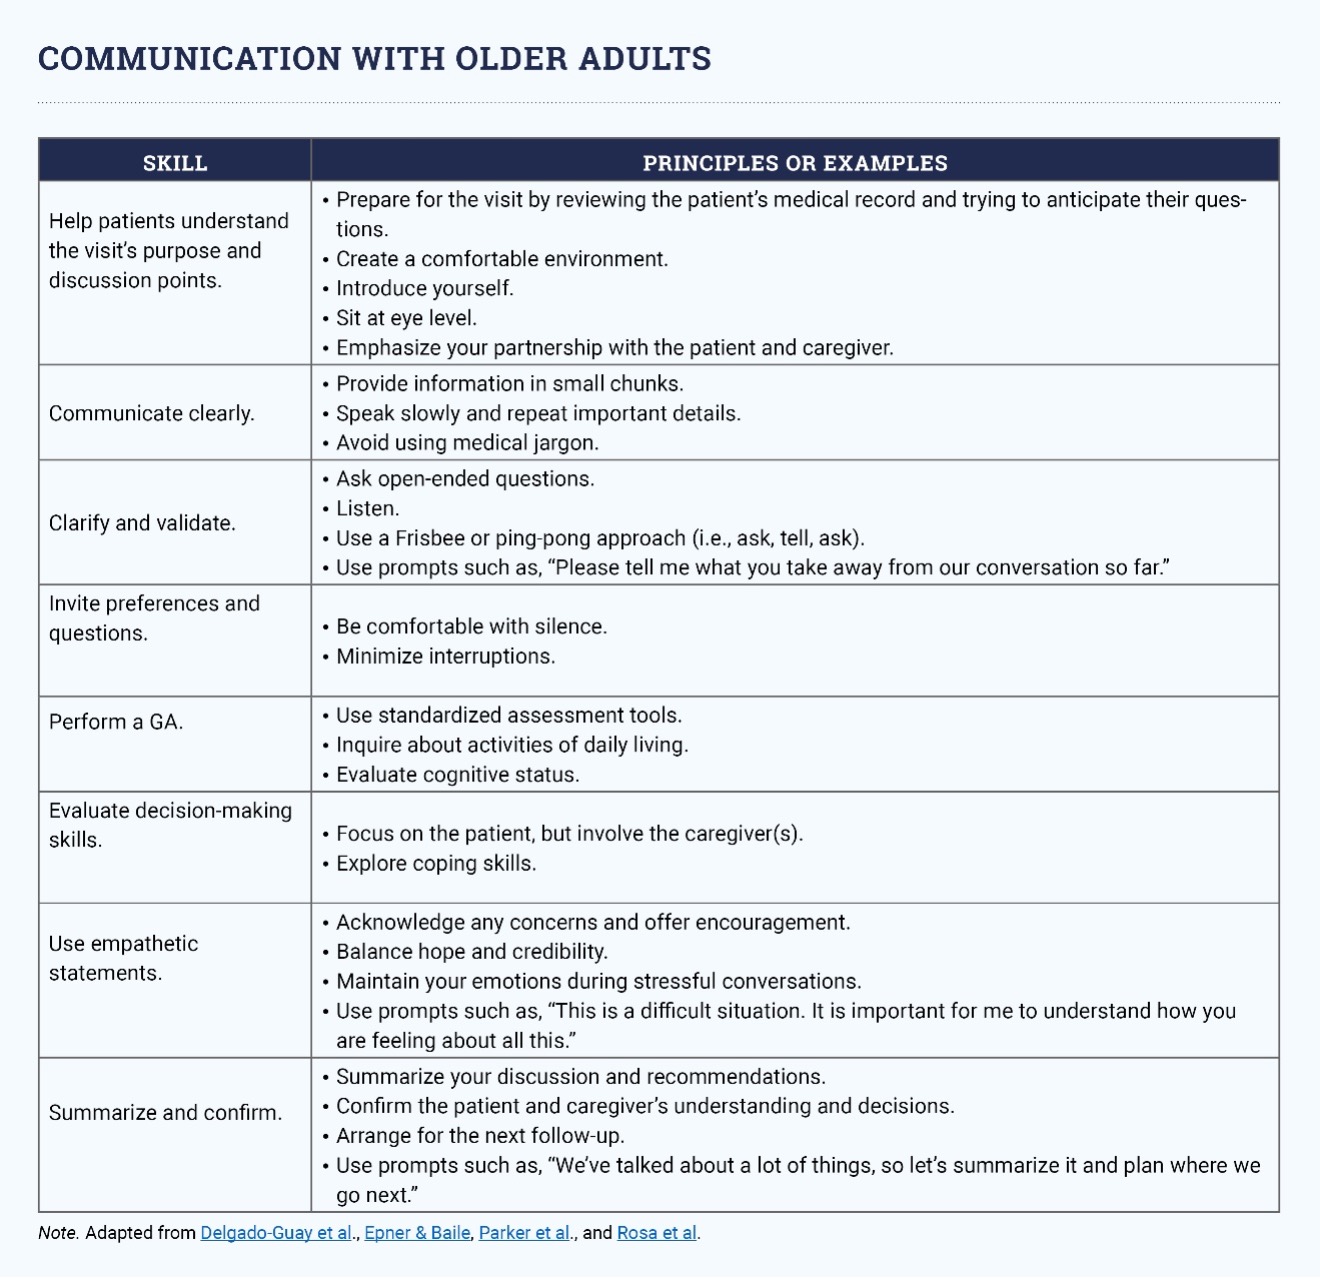 Oncology APRNs’ Role in Communicating With Older Adults With Cancer